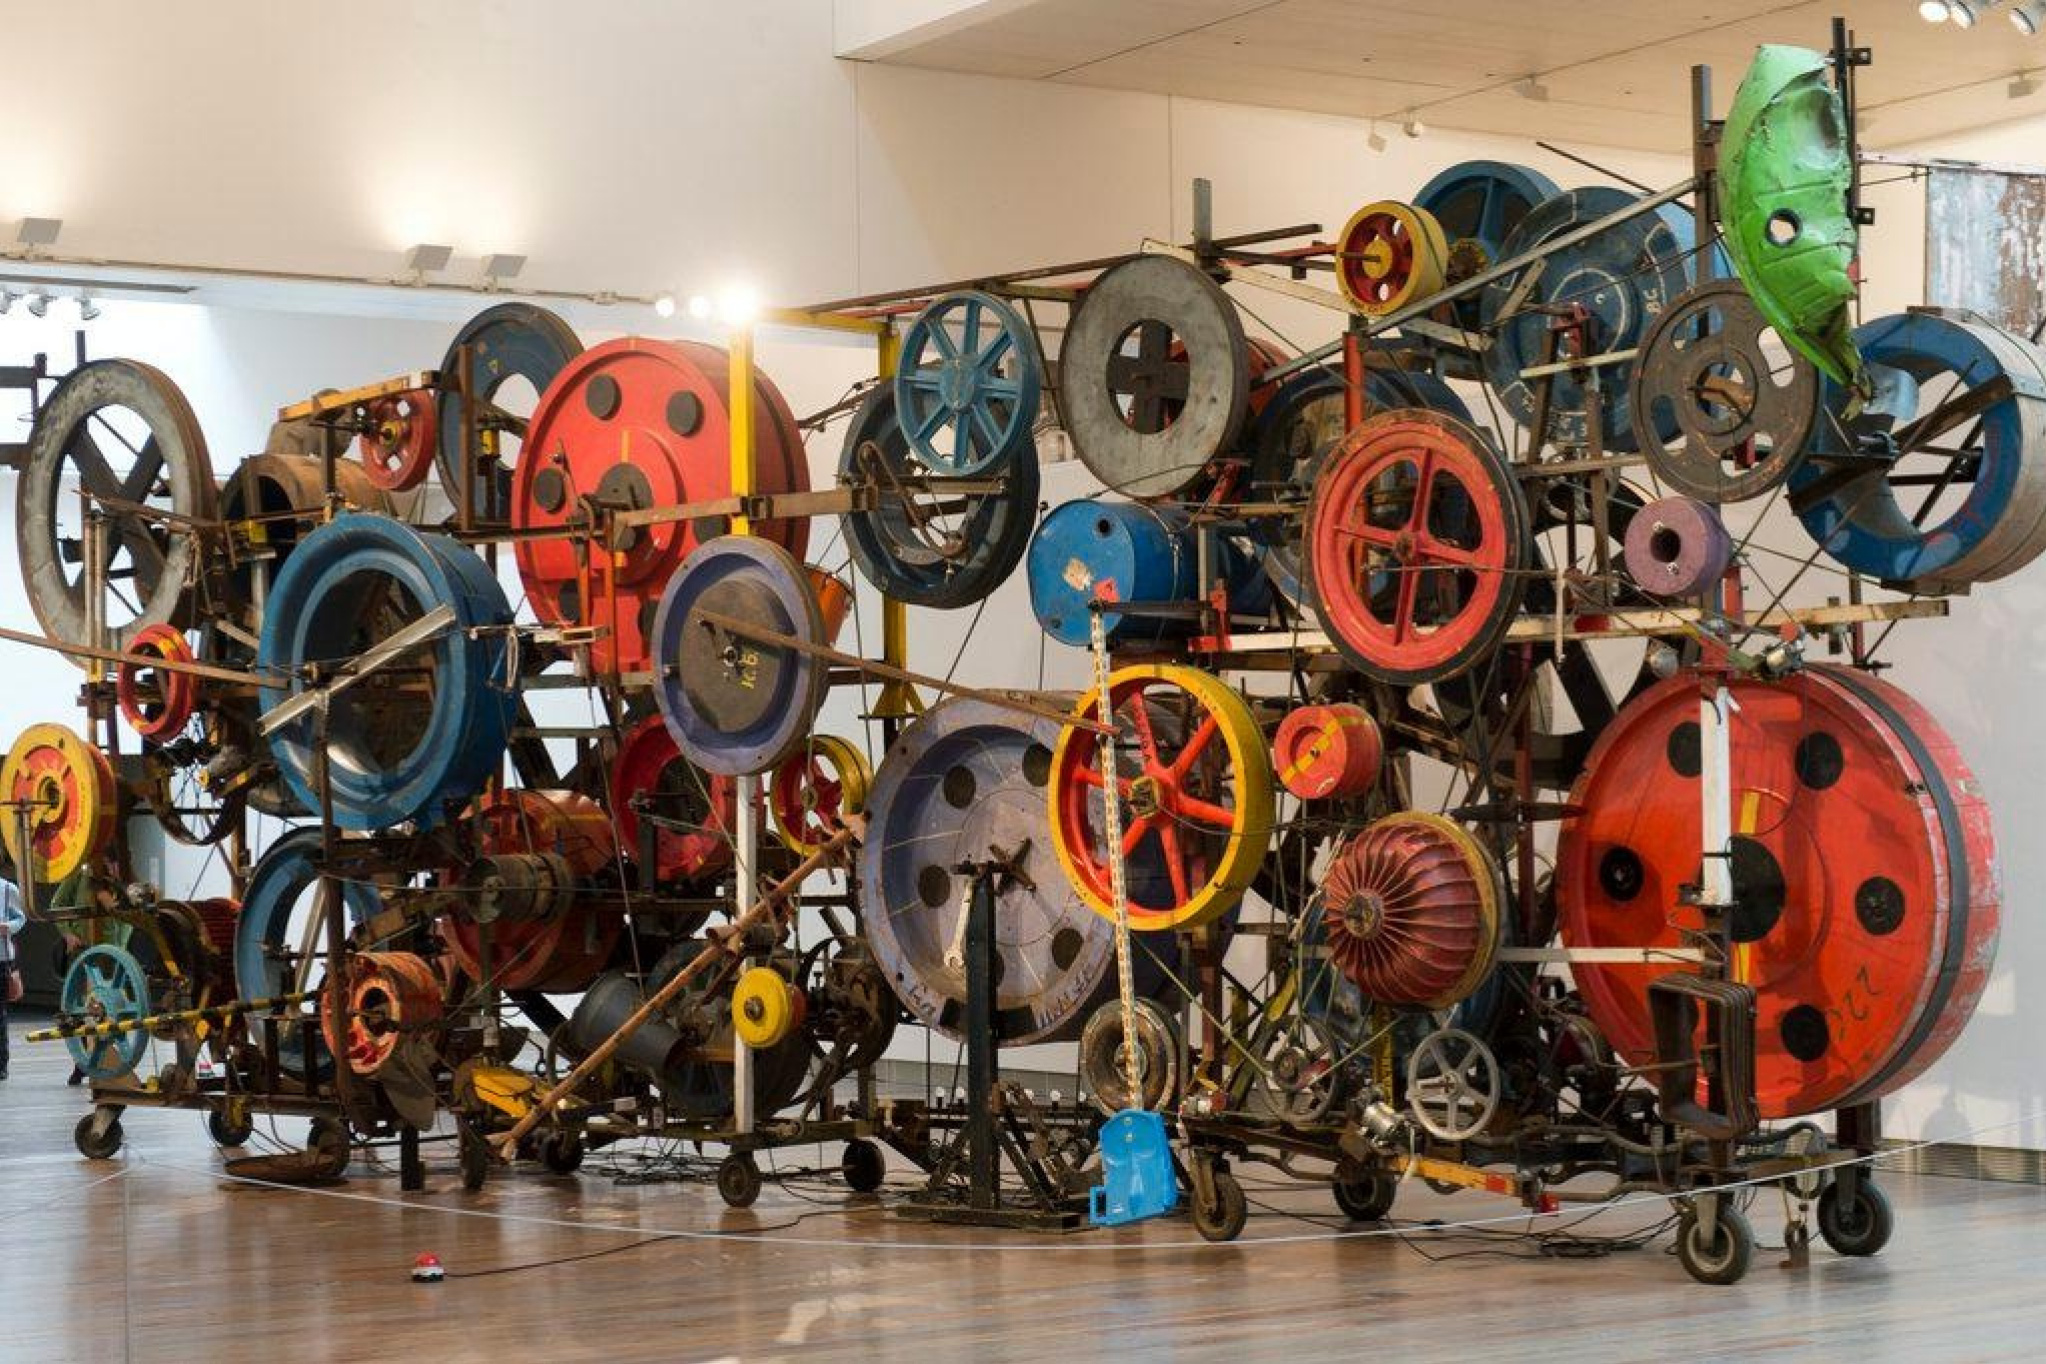 10 Defining Artists of the Kinetic Art Movement